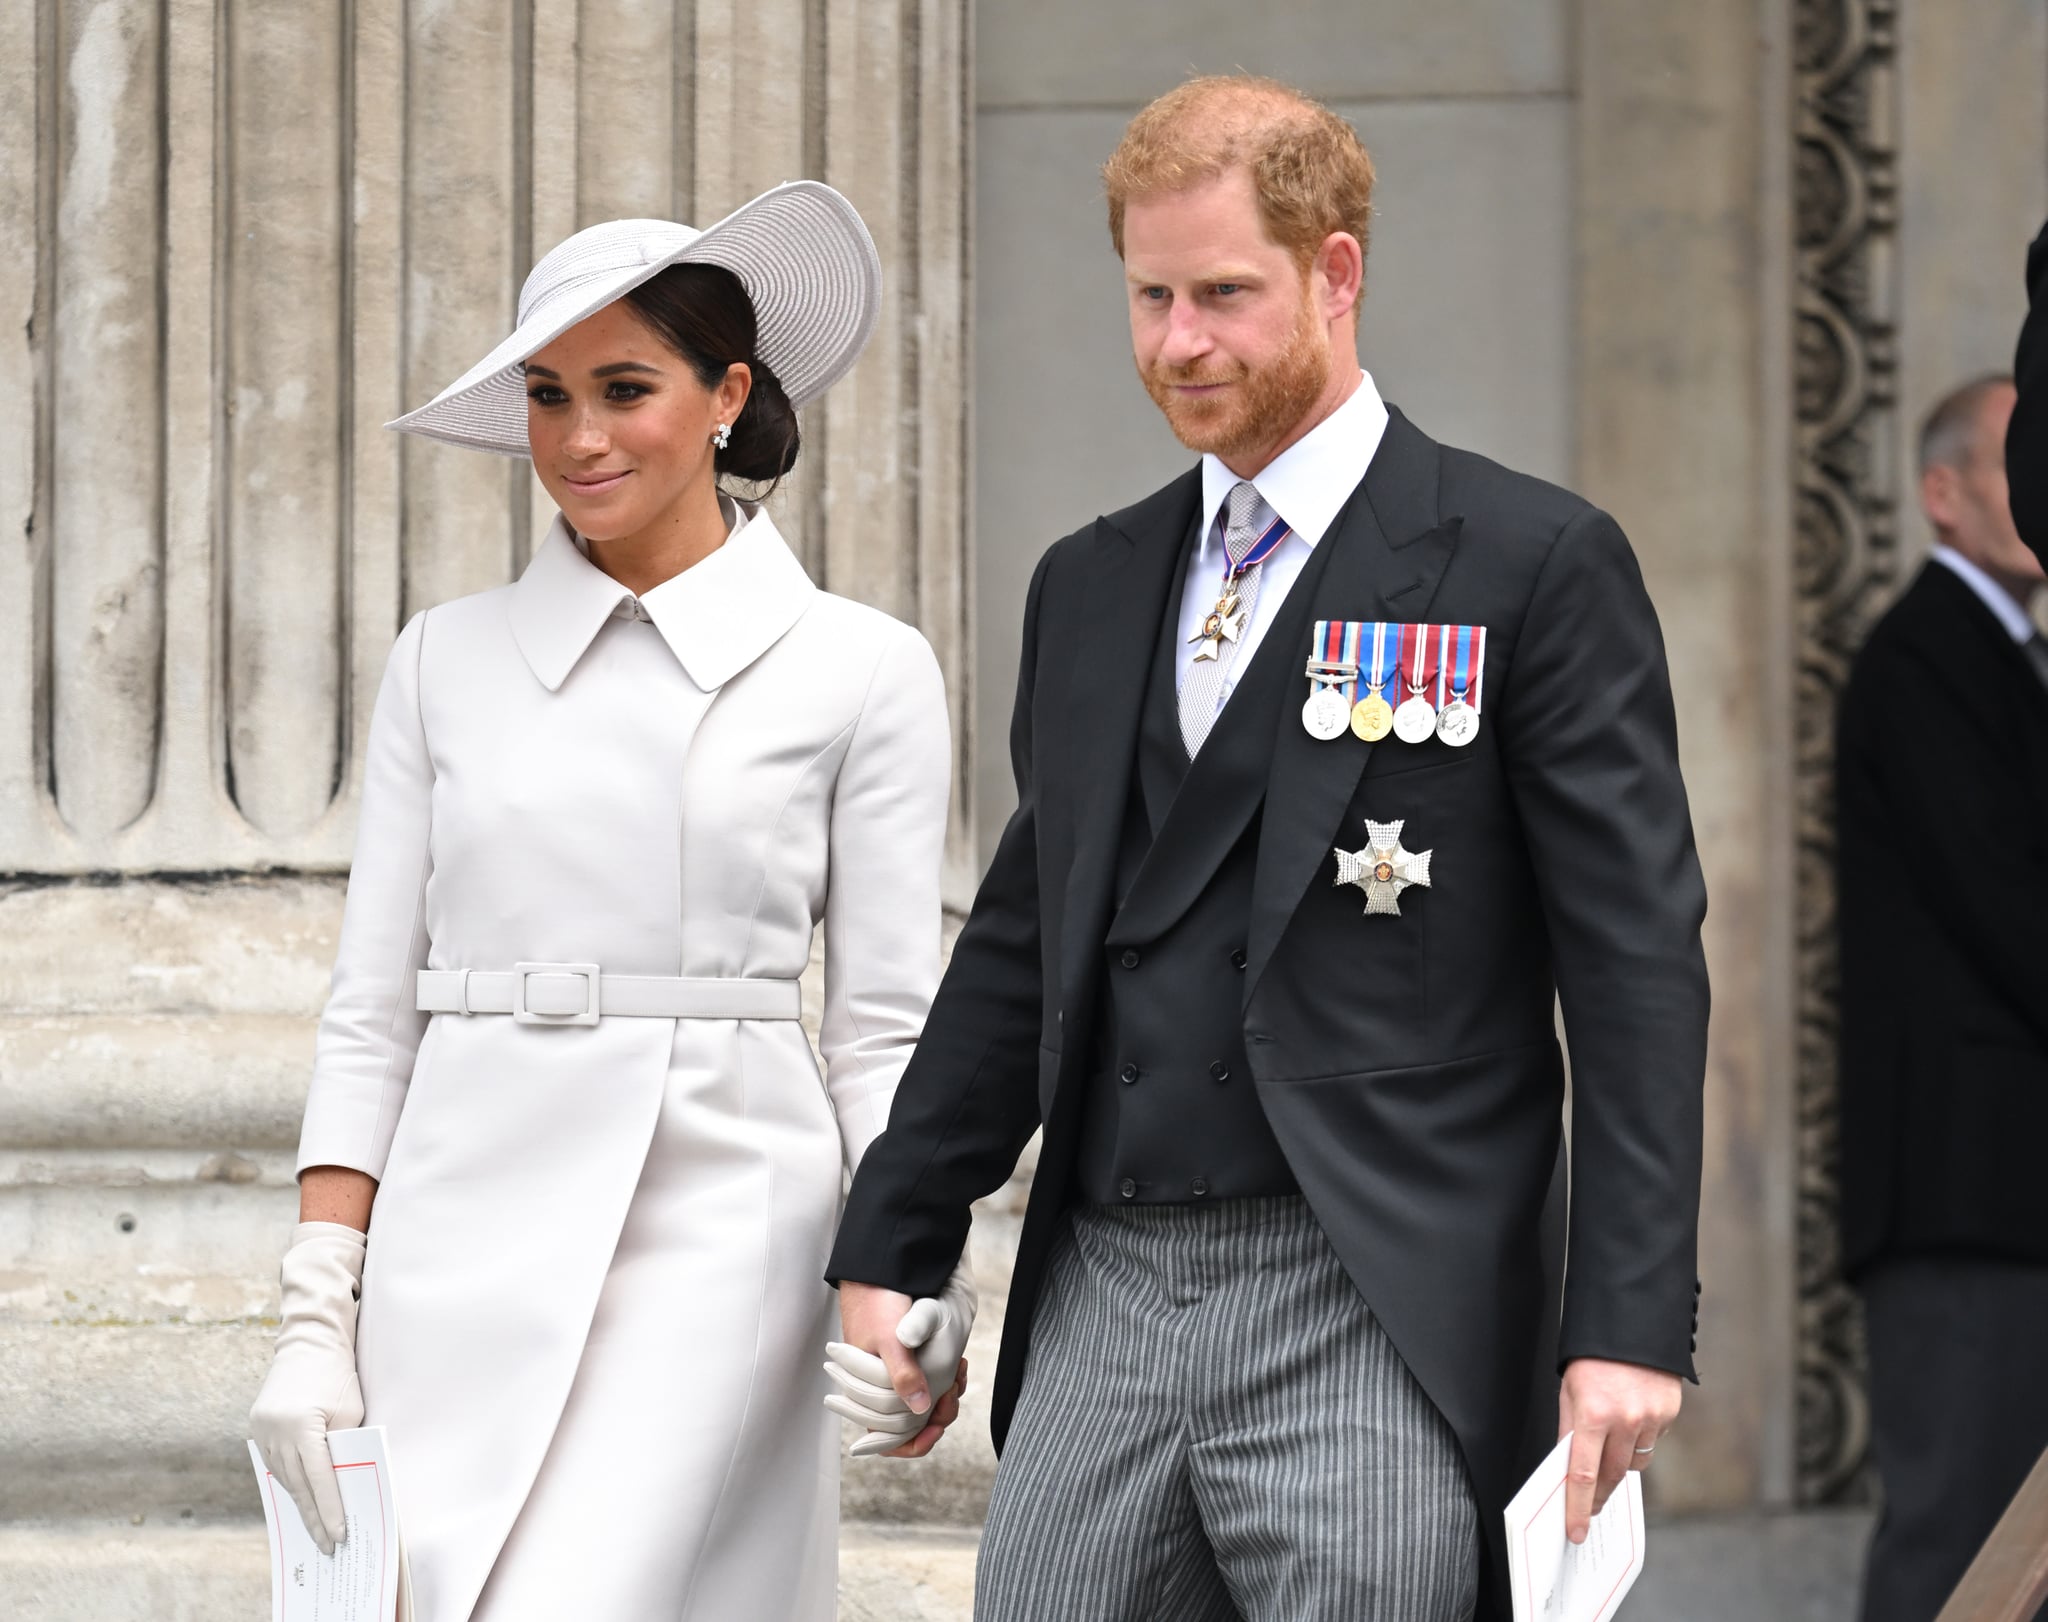 LONDON, ENGLAND - JUNE 03: Meghan, Duchess of Sussex and Prince Harry, Duke of Sussex attend the National Service of Thanksgiving at St Paul's Cathedral on June 03, 2022 in London, England. The Platinum Jubilee of Elizabeth II is being celebrated from June 2 to June 5, 2022, in the UK and Commonwealth to mark the 70th anniversary of the accession of Queen Elizabeth II on 6 February 1952. (Photo by Karwai Tang/WireImage)